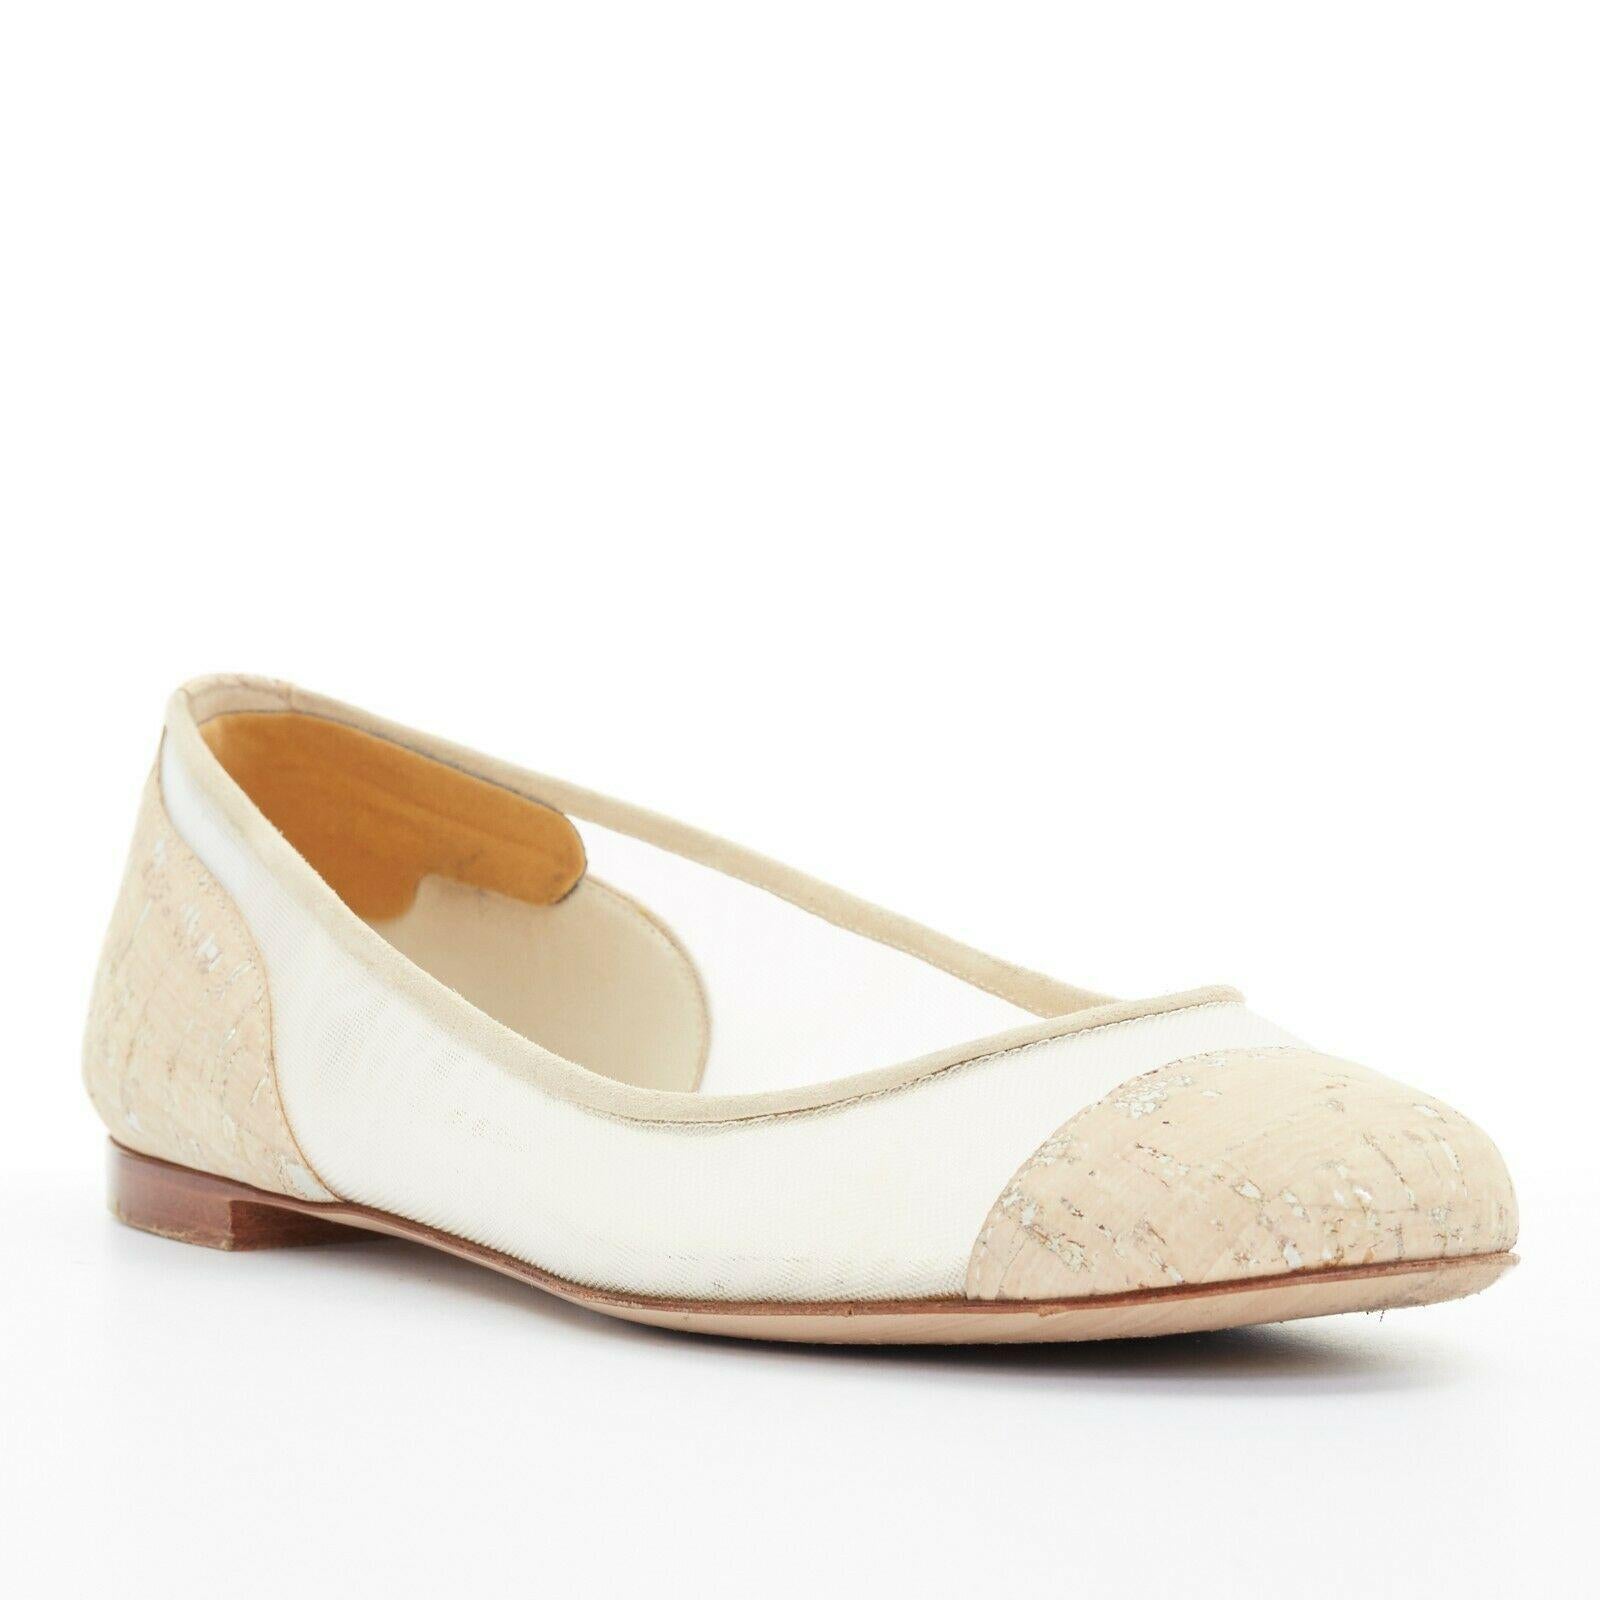 CHANEL white brown cork round toe cap CC logo flats shoes EU39 US9 UK6

CHANEL
Cream white body. Taupe grey suede piping along opening. Natural brown and silver speckle cork toe cap and heel. Gold-tone CC logo embellishment at heel. Flats shoes.